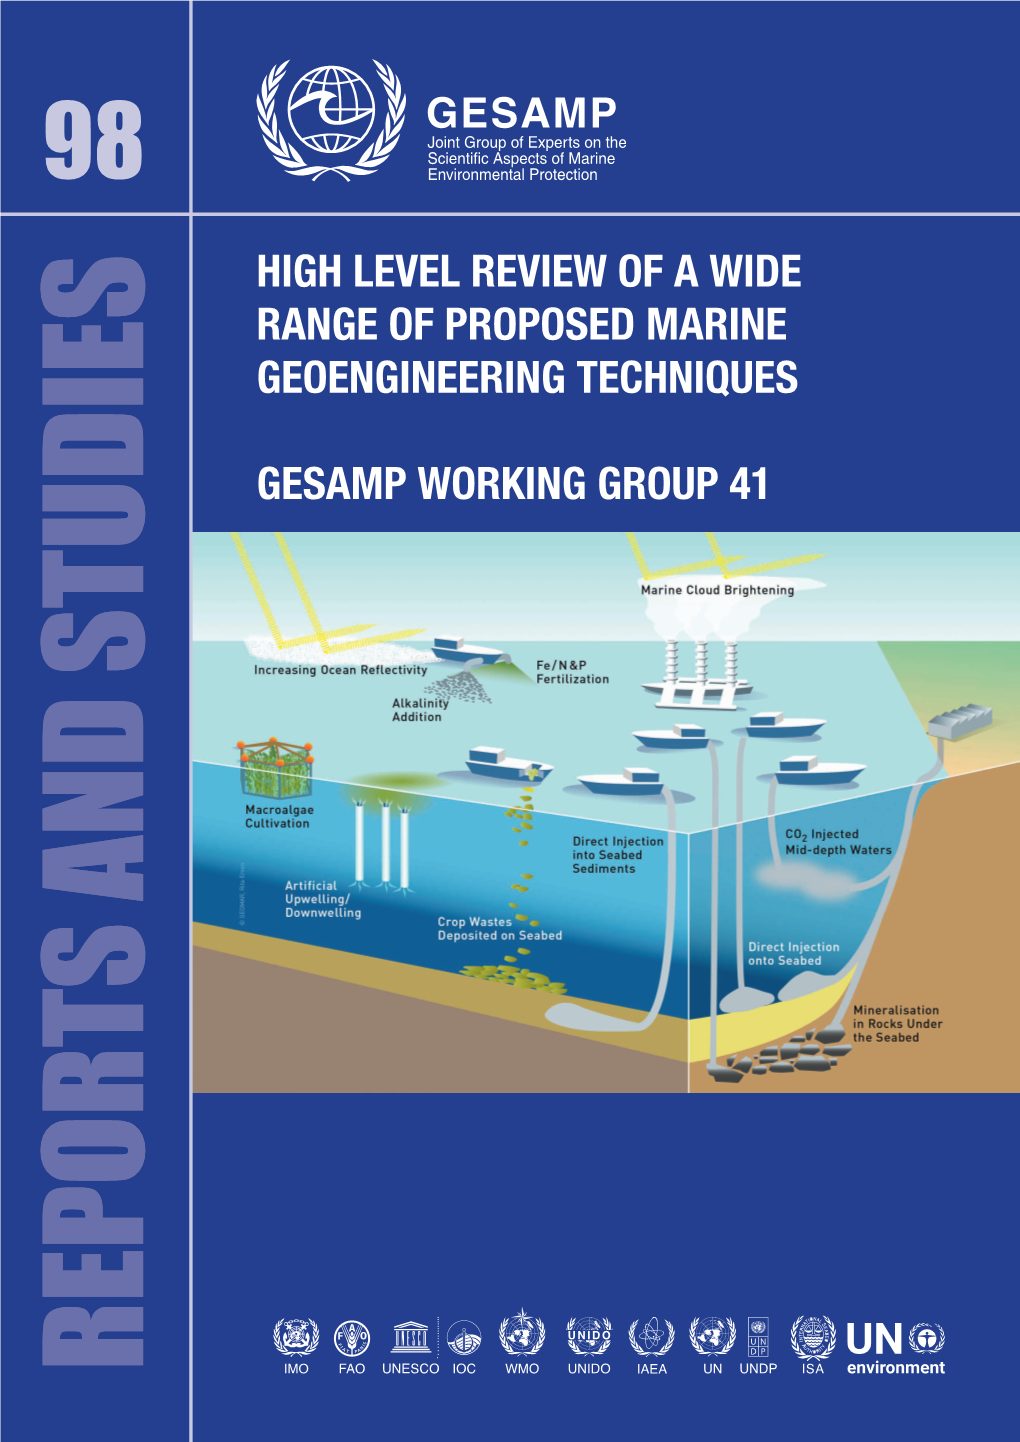 High Level Review of a Wide Range of Proposed Marine Geoengineering Techniques